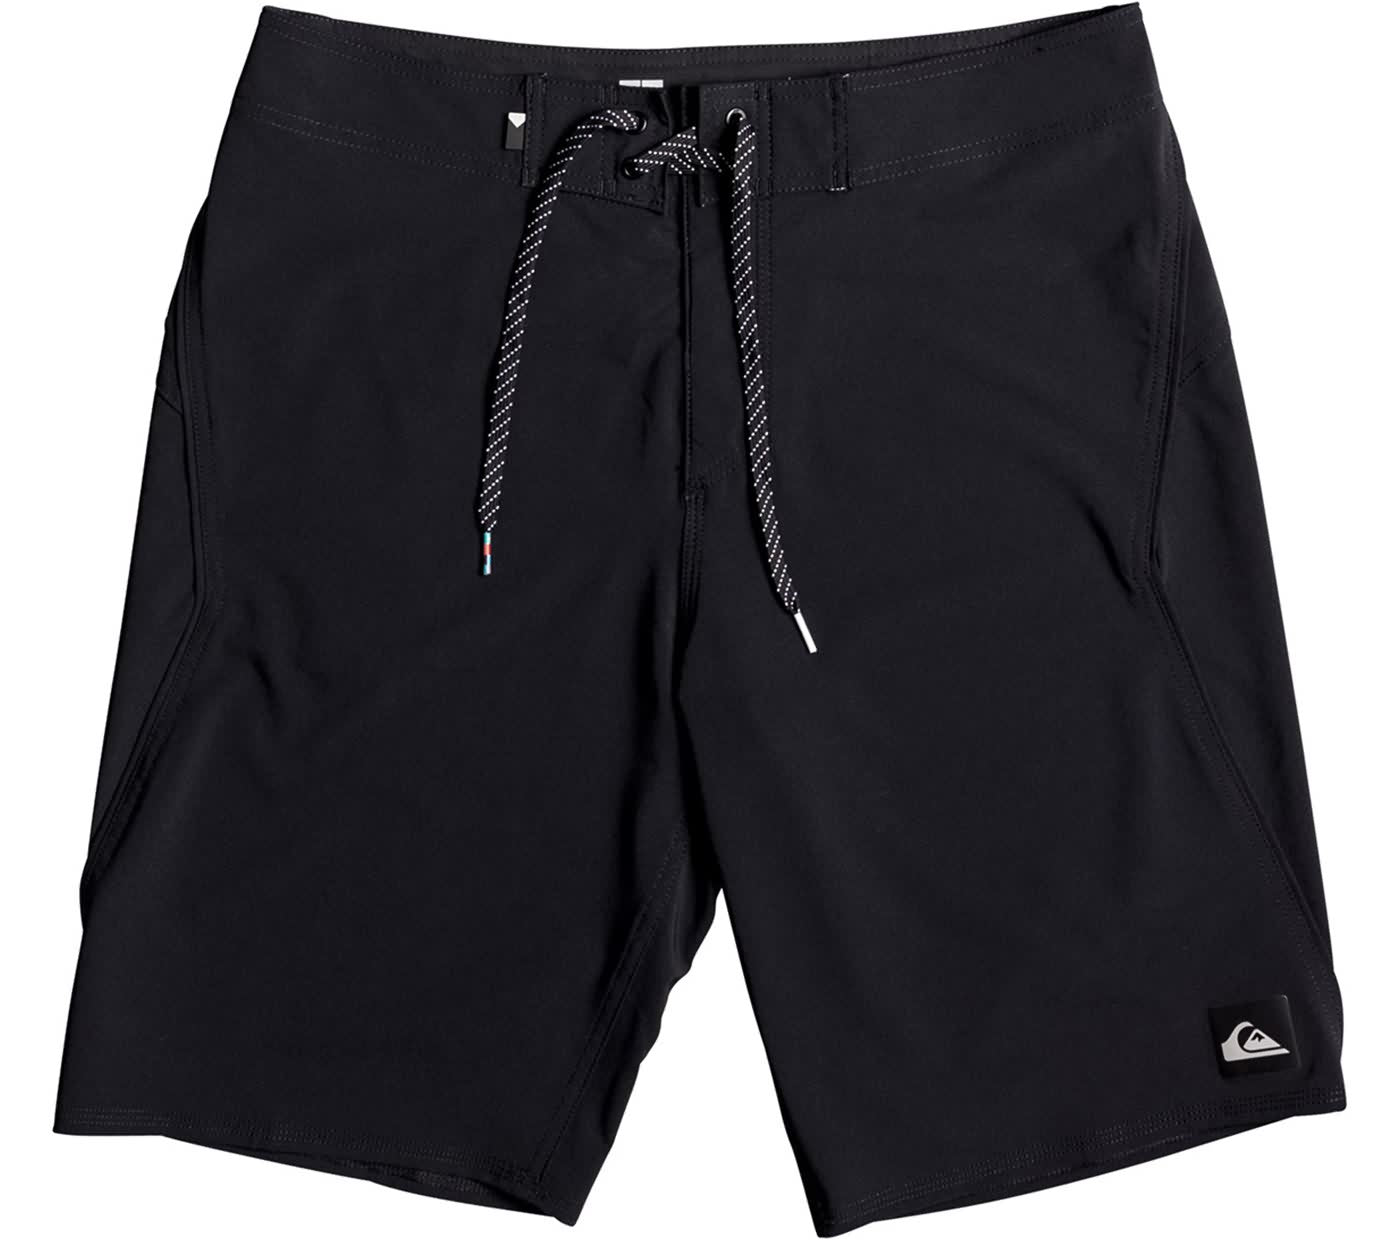 Quiksilver Surf Fall 2017 Mens Surfing Boardshorts Collection